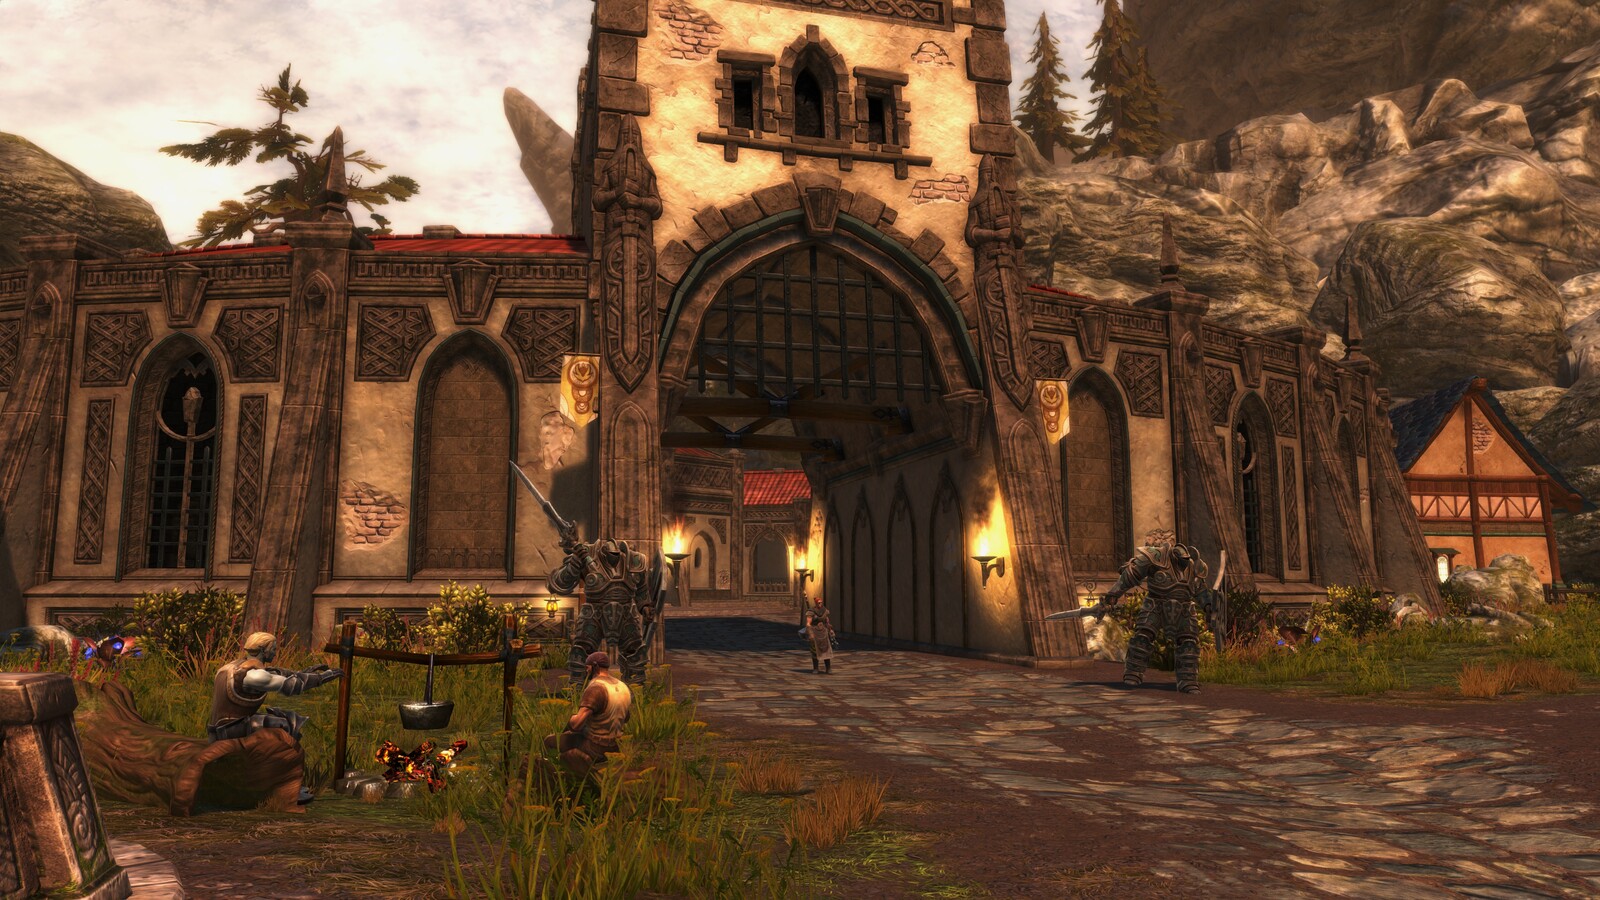 Skald's arena as it appears in the game